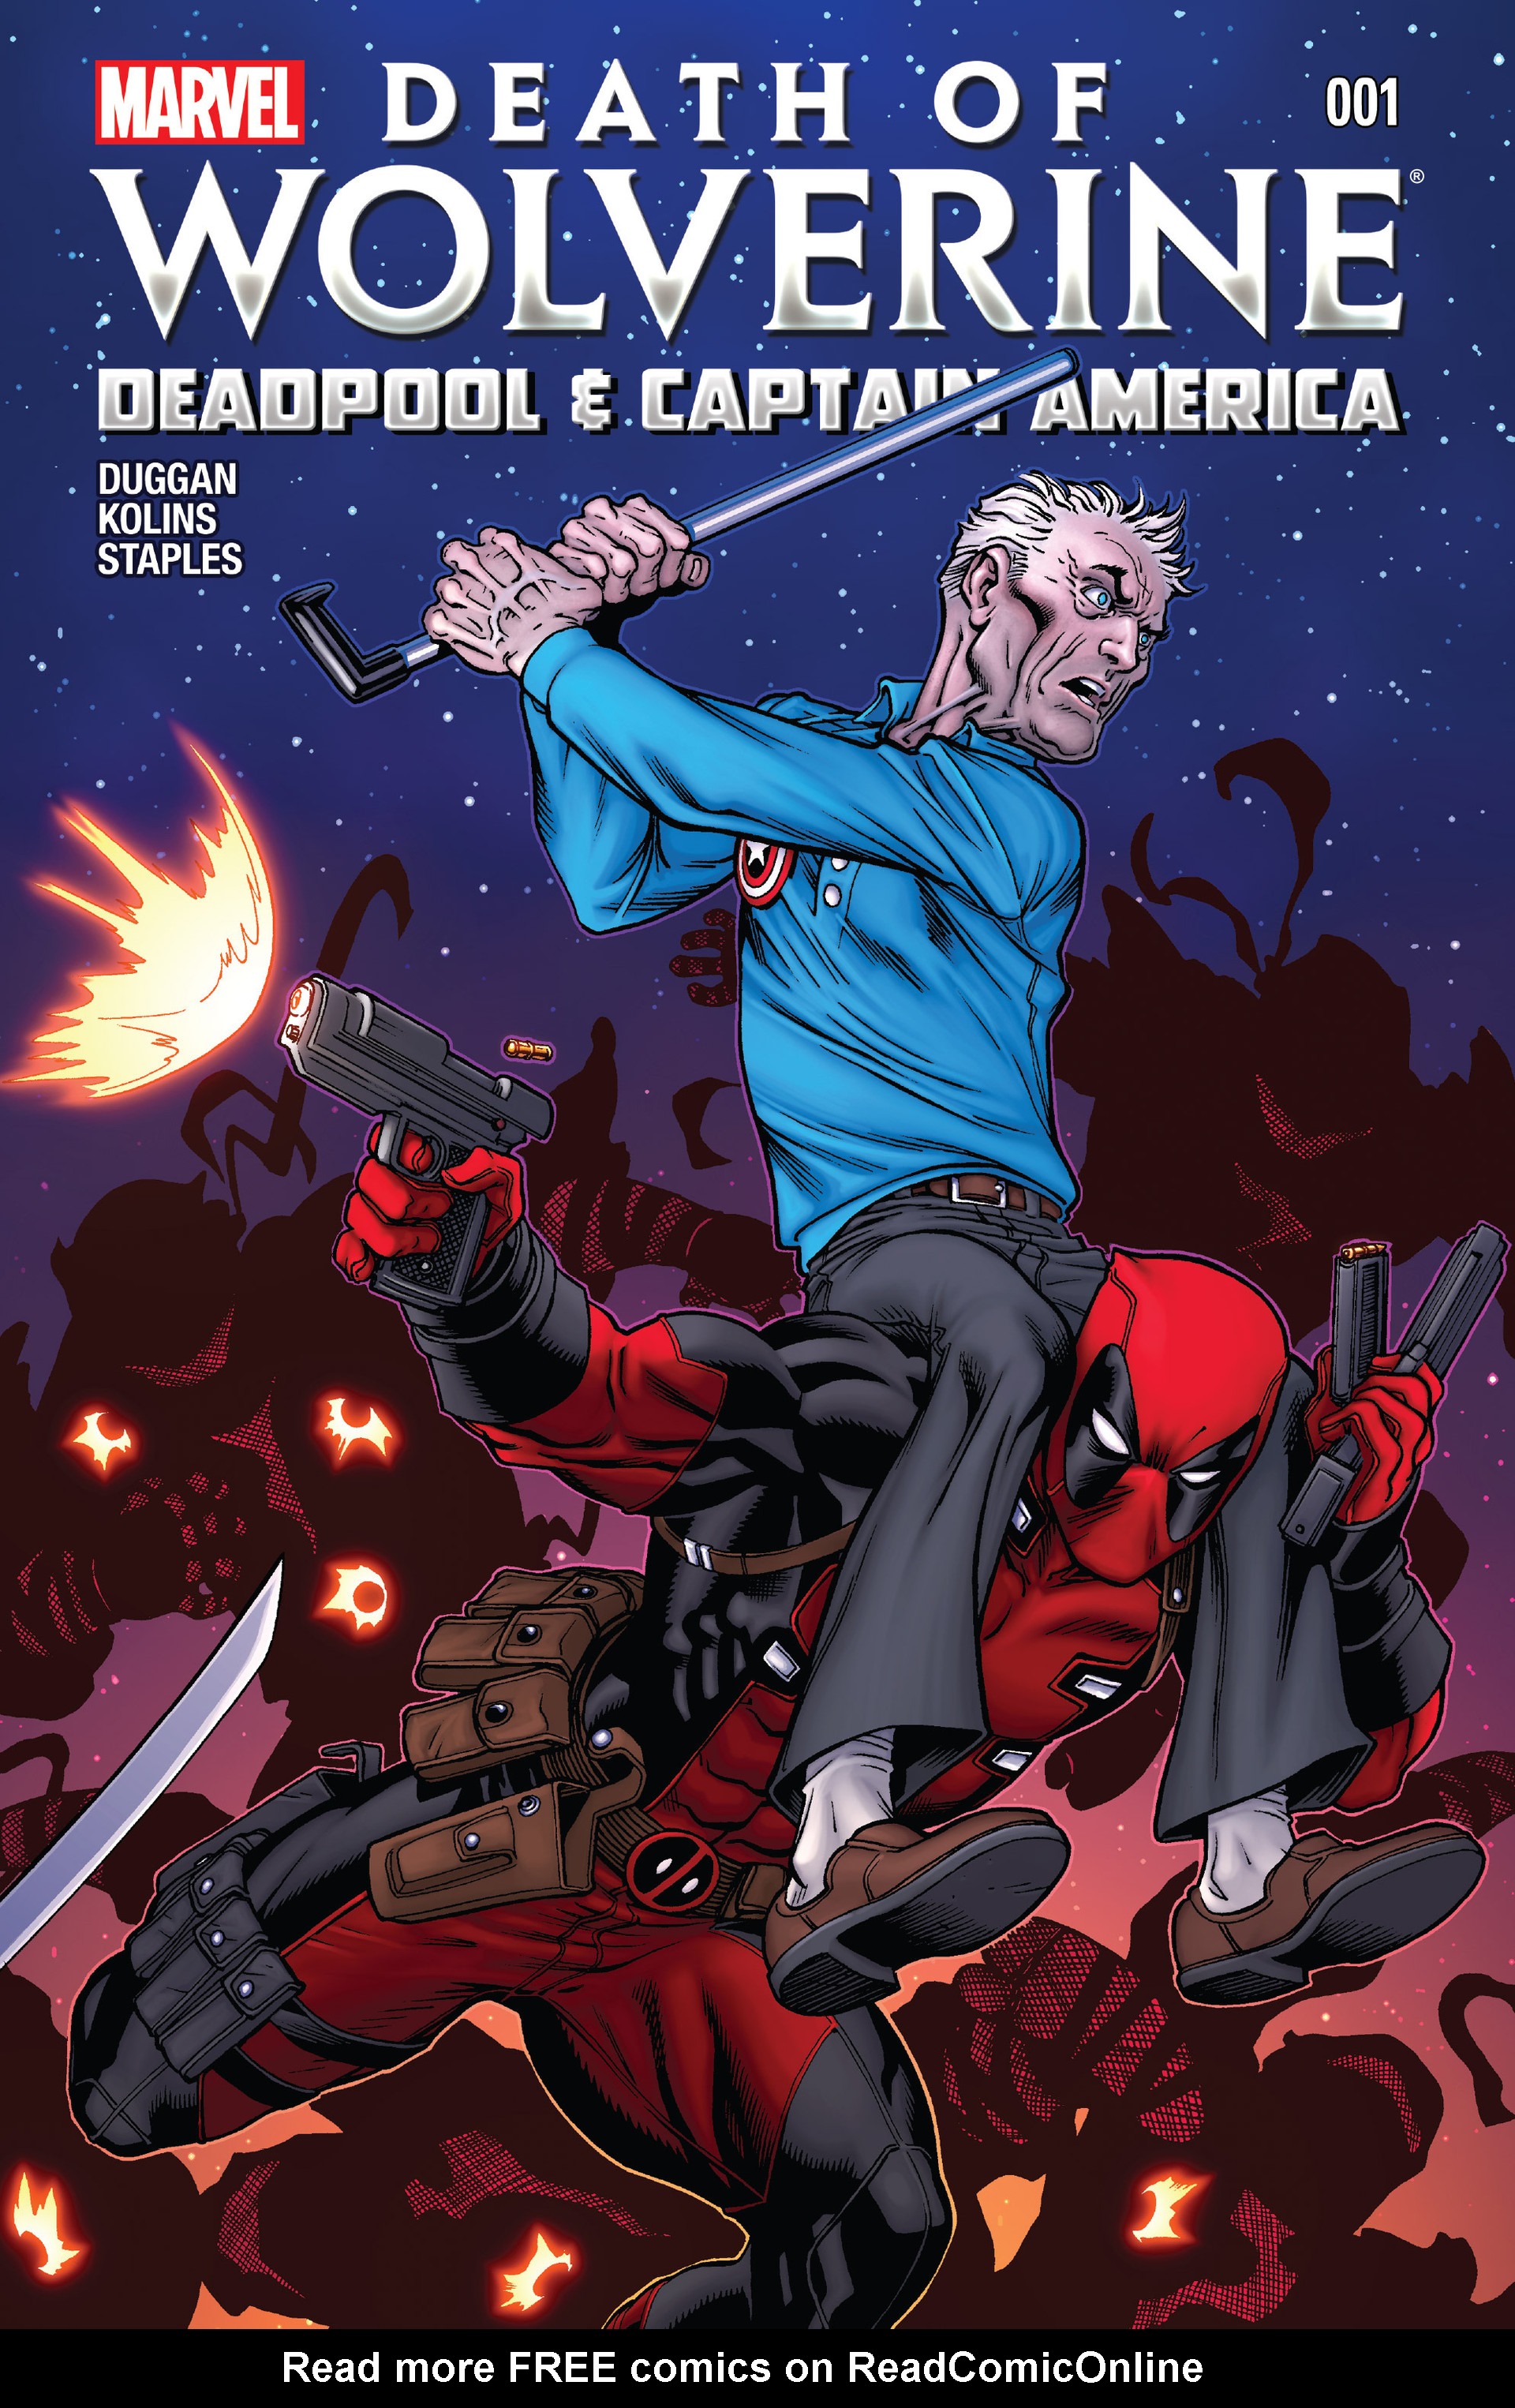 Death Of Wolverine Deadpool Captain America Full | Read Death Of Wolverine  Deadpool Captain America Full comic online in high quality. Read Full Comic  online for free - Read comics online in